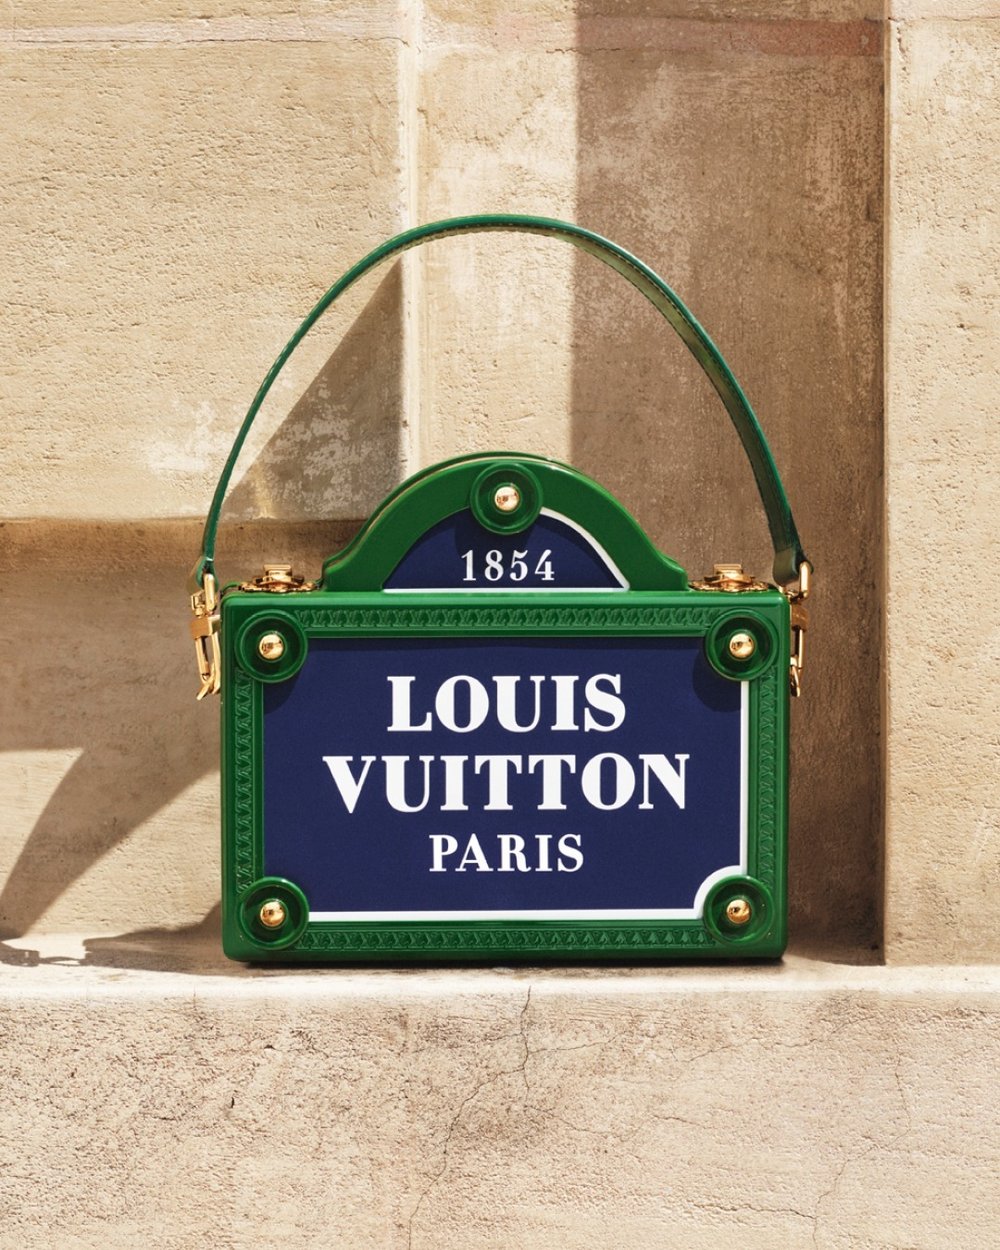 Louis Vuitton Honors Night Skies with Summer Stardust Collection